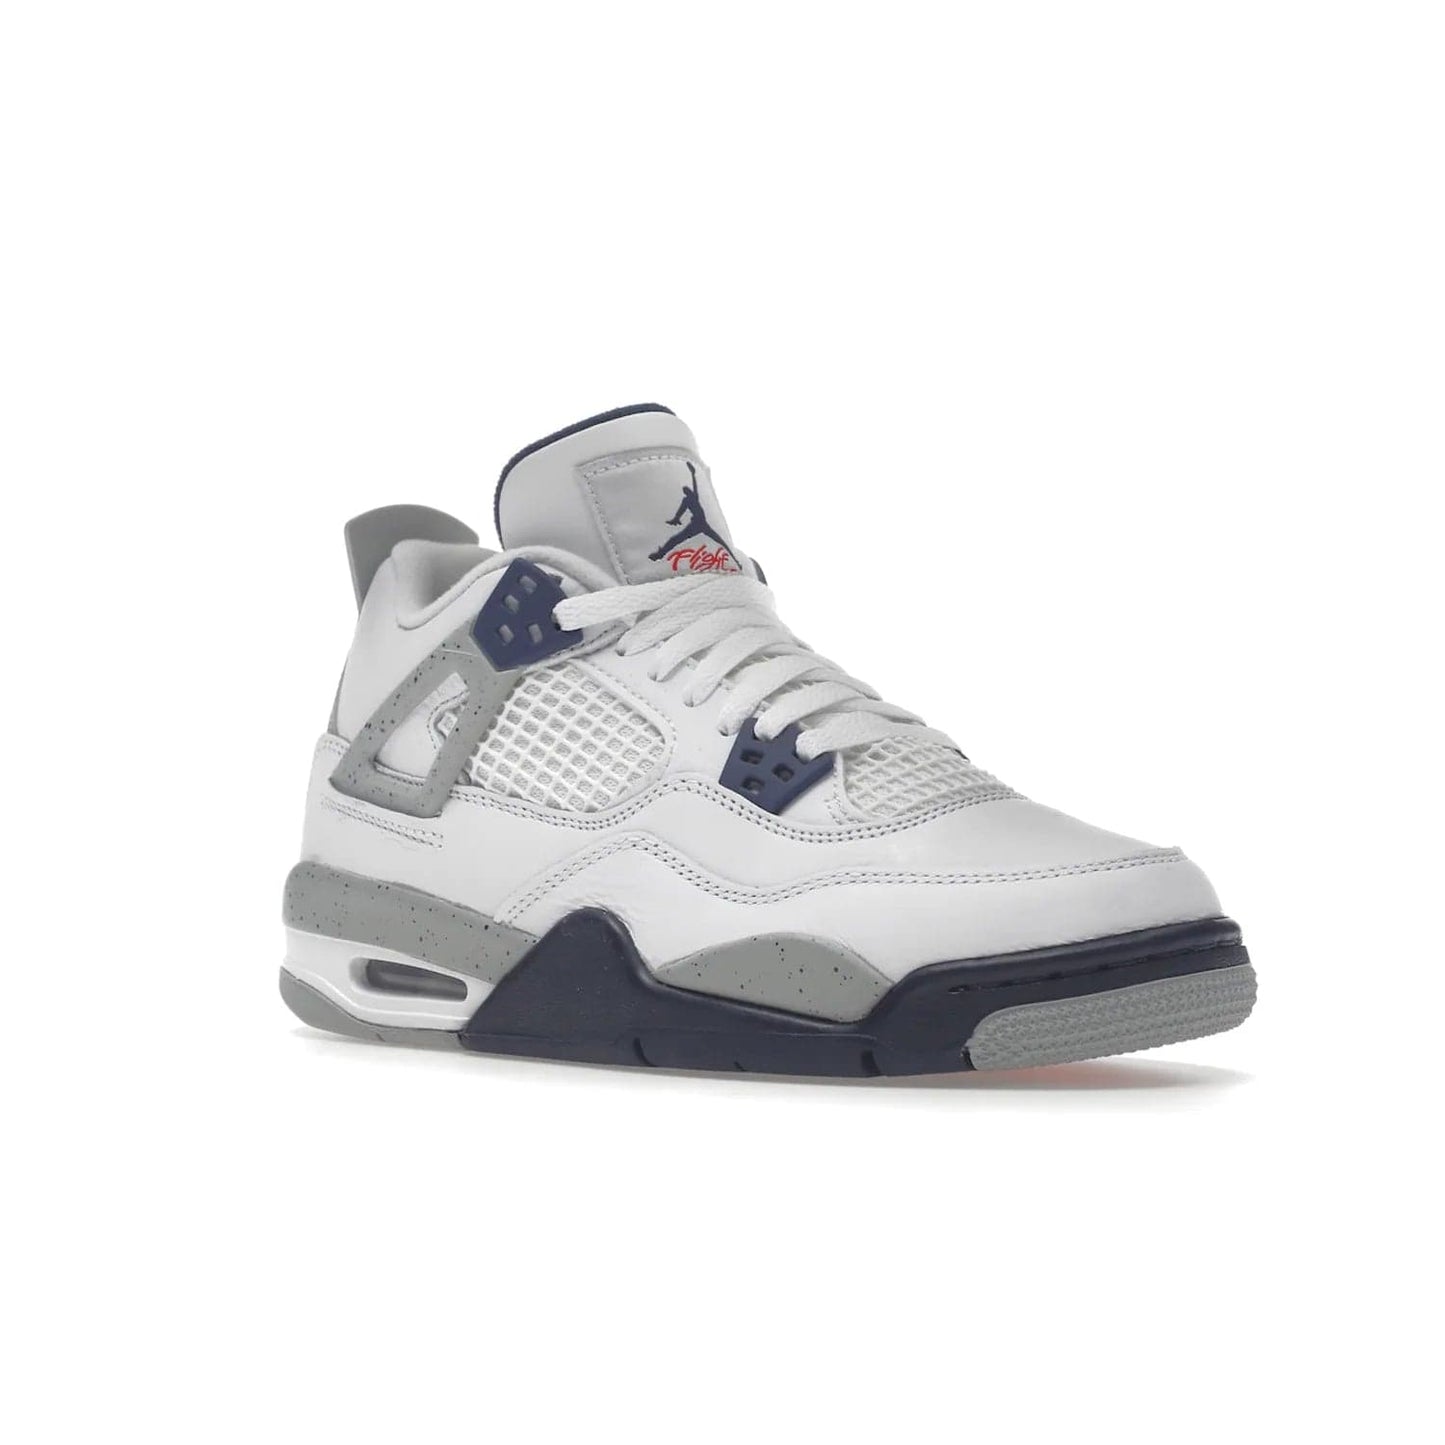 Jordan 4 Retro Midnight Navy (GS) - Image 5 - Only at www.BallersClubKickz.com - Shop the Air Jordan 4 Retro Midnight Navy GS. The white leather upper features black support wings & heel tab, navy eyelets & woven tongue tag with Jumpman logos. The midsole features two-tone polyurethane insole & AIR units in the heel & forefoot. Get the white/midnight navy/light smoke grey/fire colorway & show off your style.